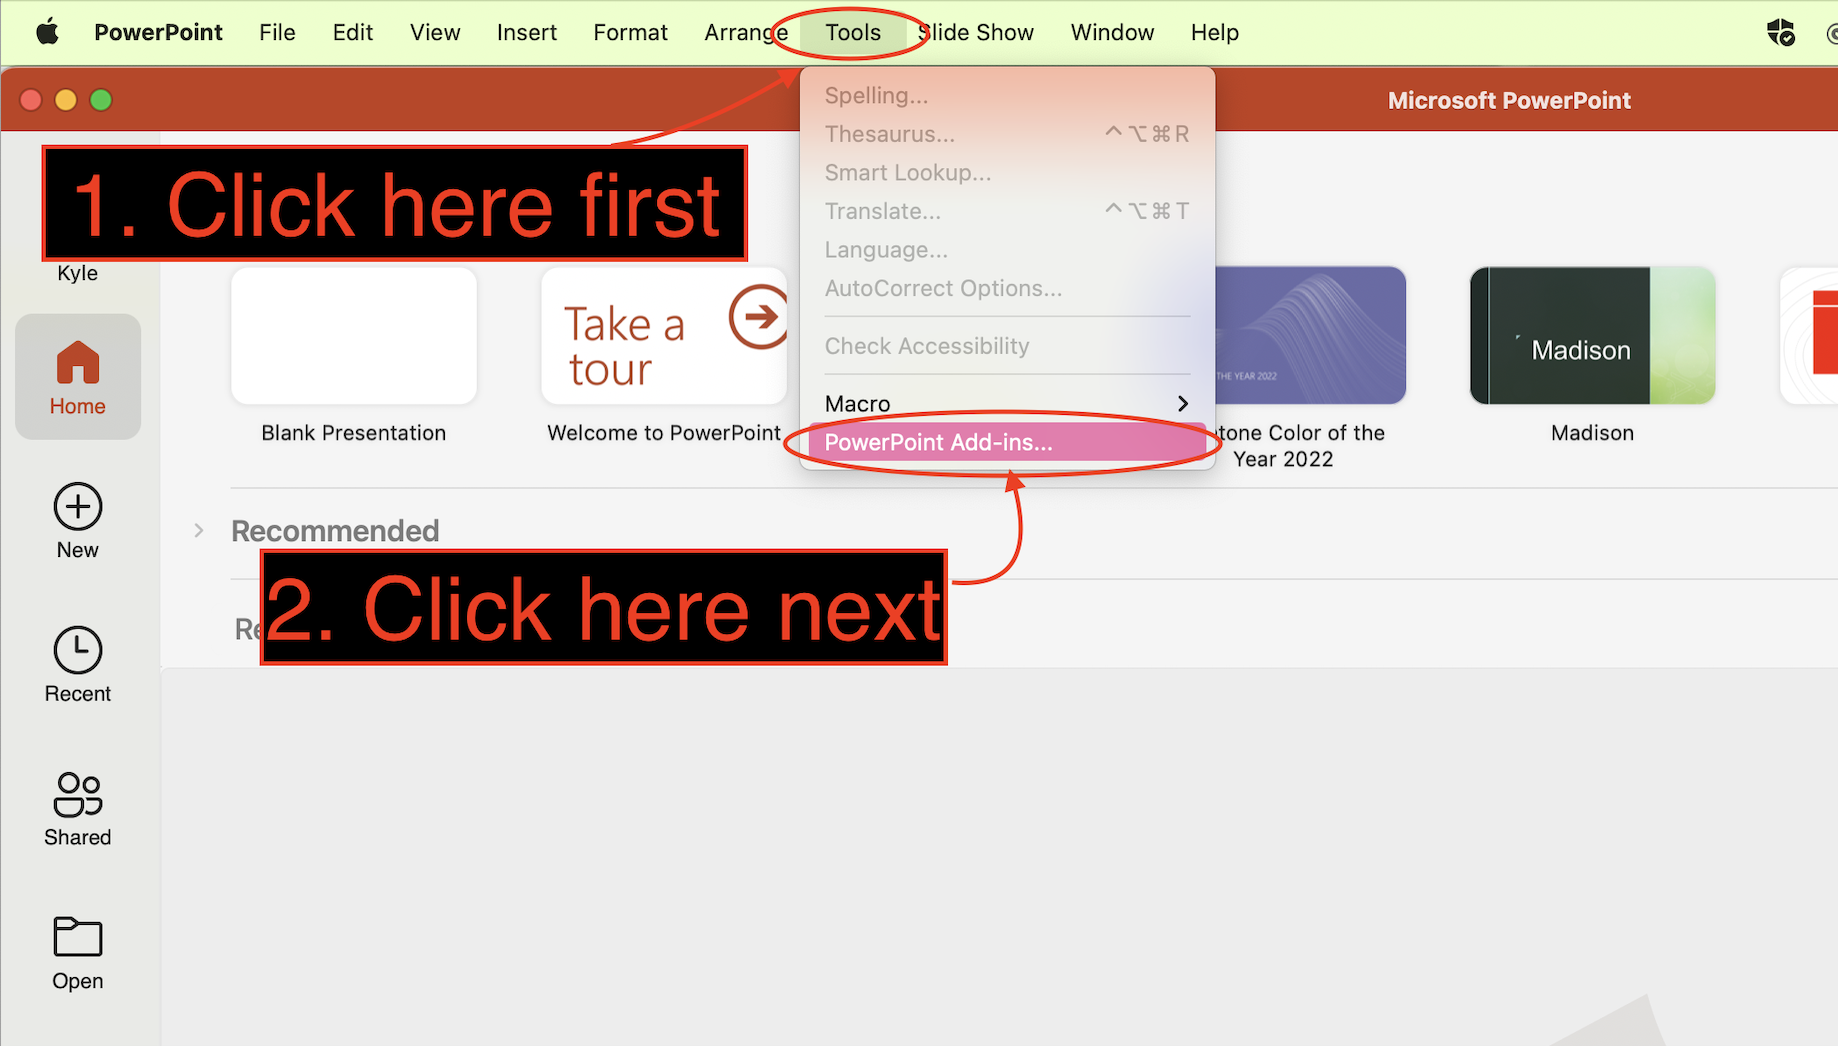 PowerPoint Tools menu selected with the Add-ins menu highlighted